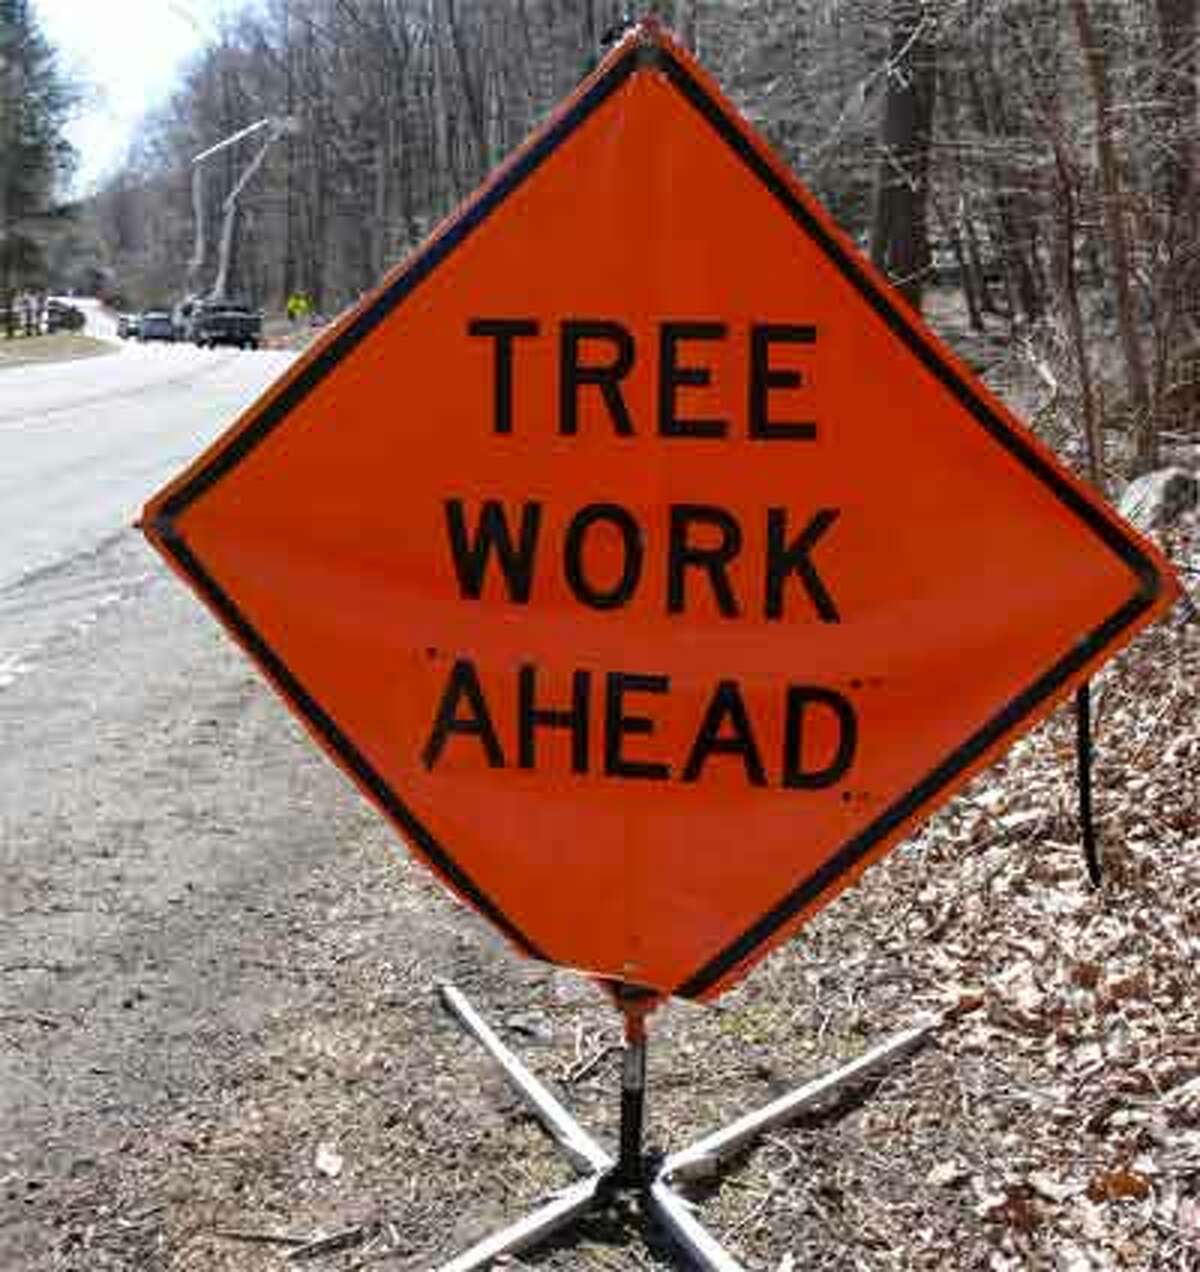 “Tree Work Ahead” signs have become a common sight around town as United Illuminating moves forward with creating a utility protection zone around power lines, based on a new state law.